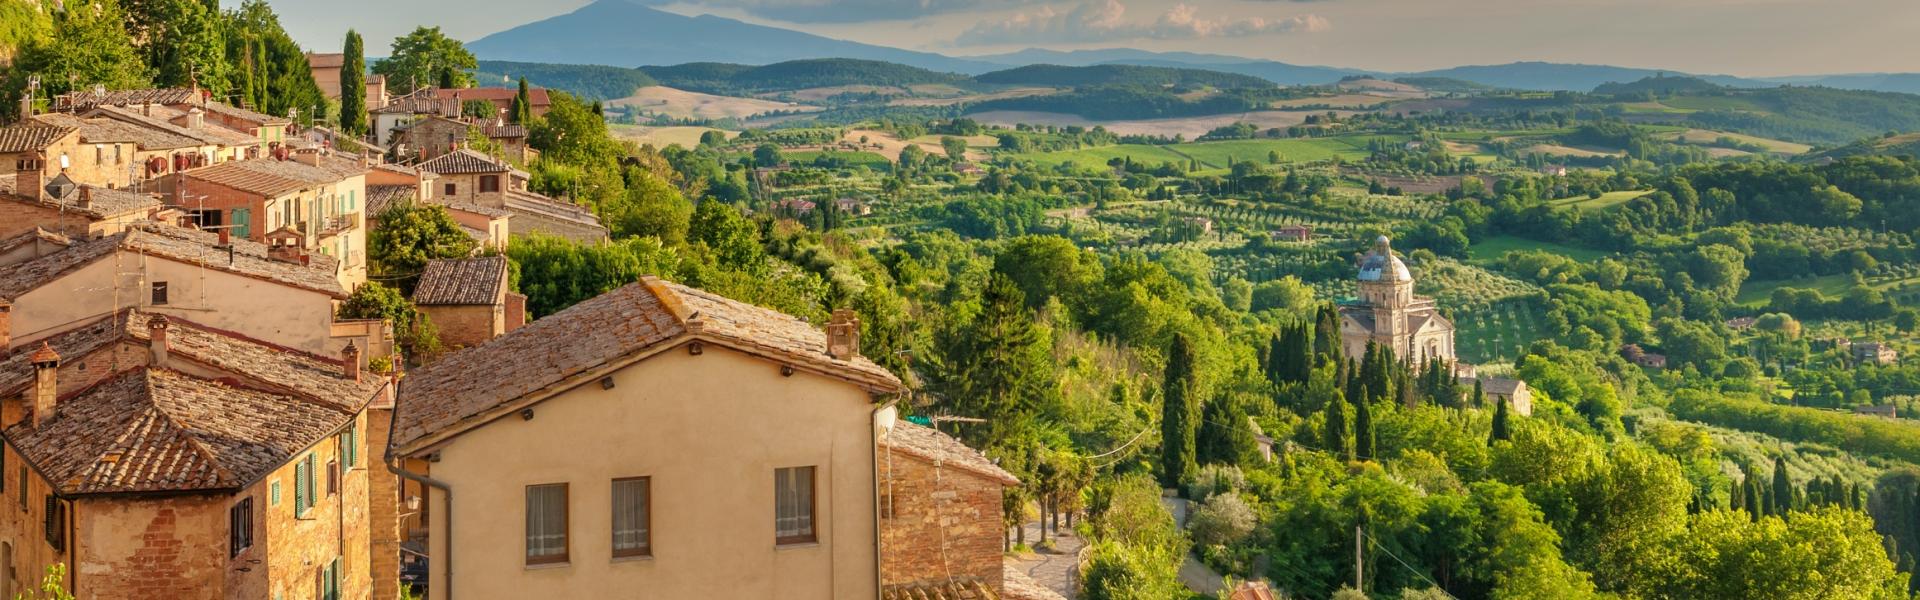 Find the perfect vacation home in Tuscany - Casamundo